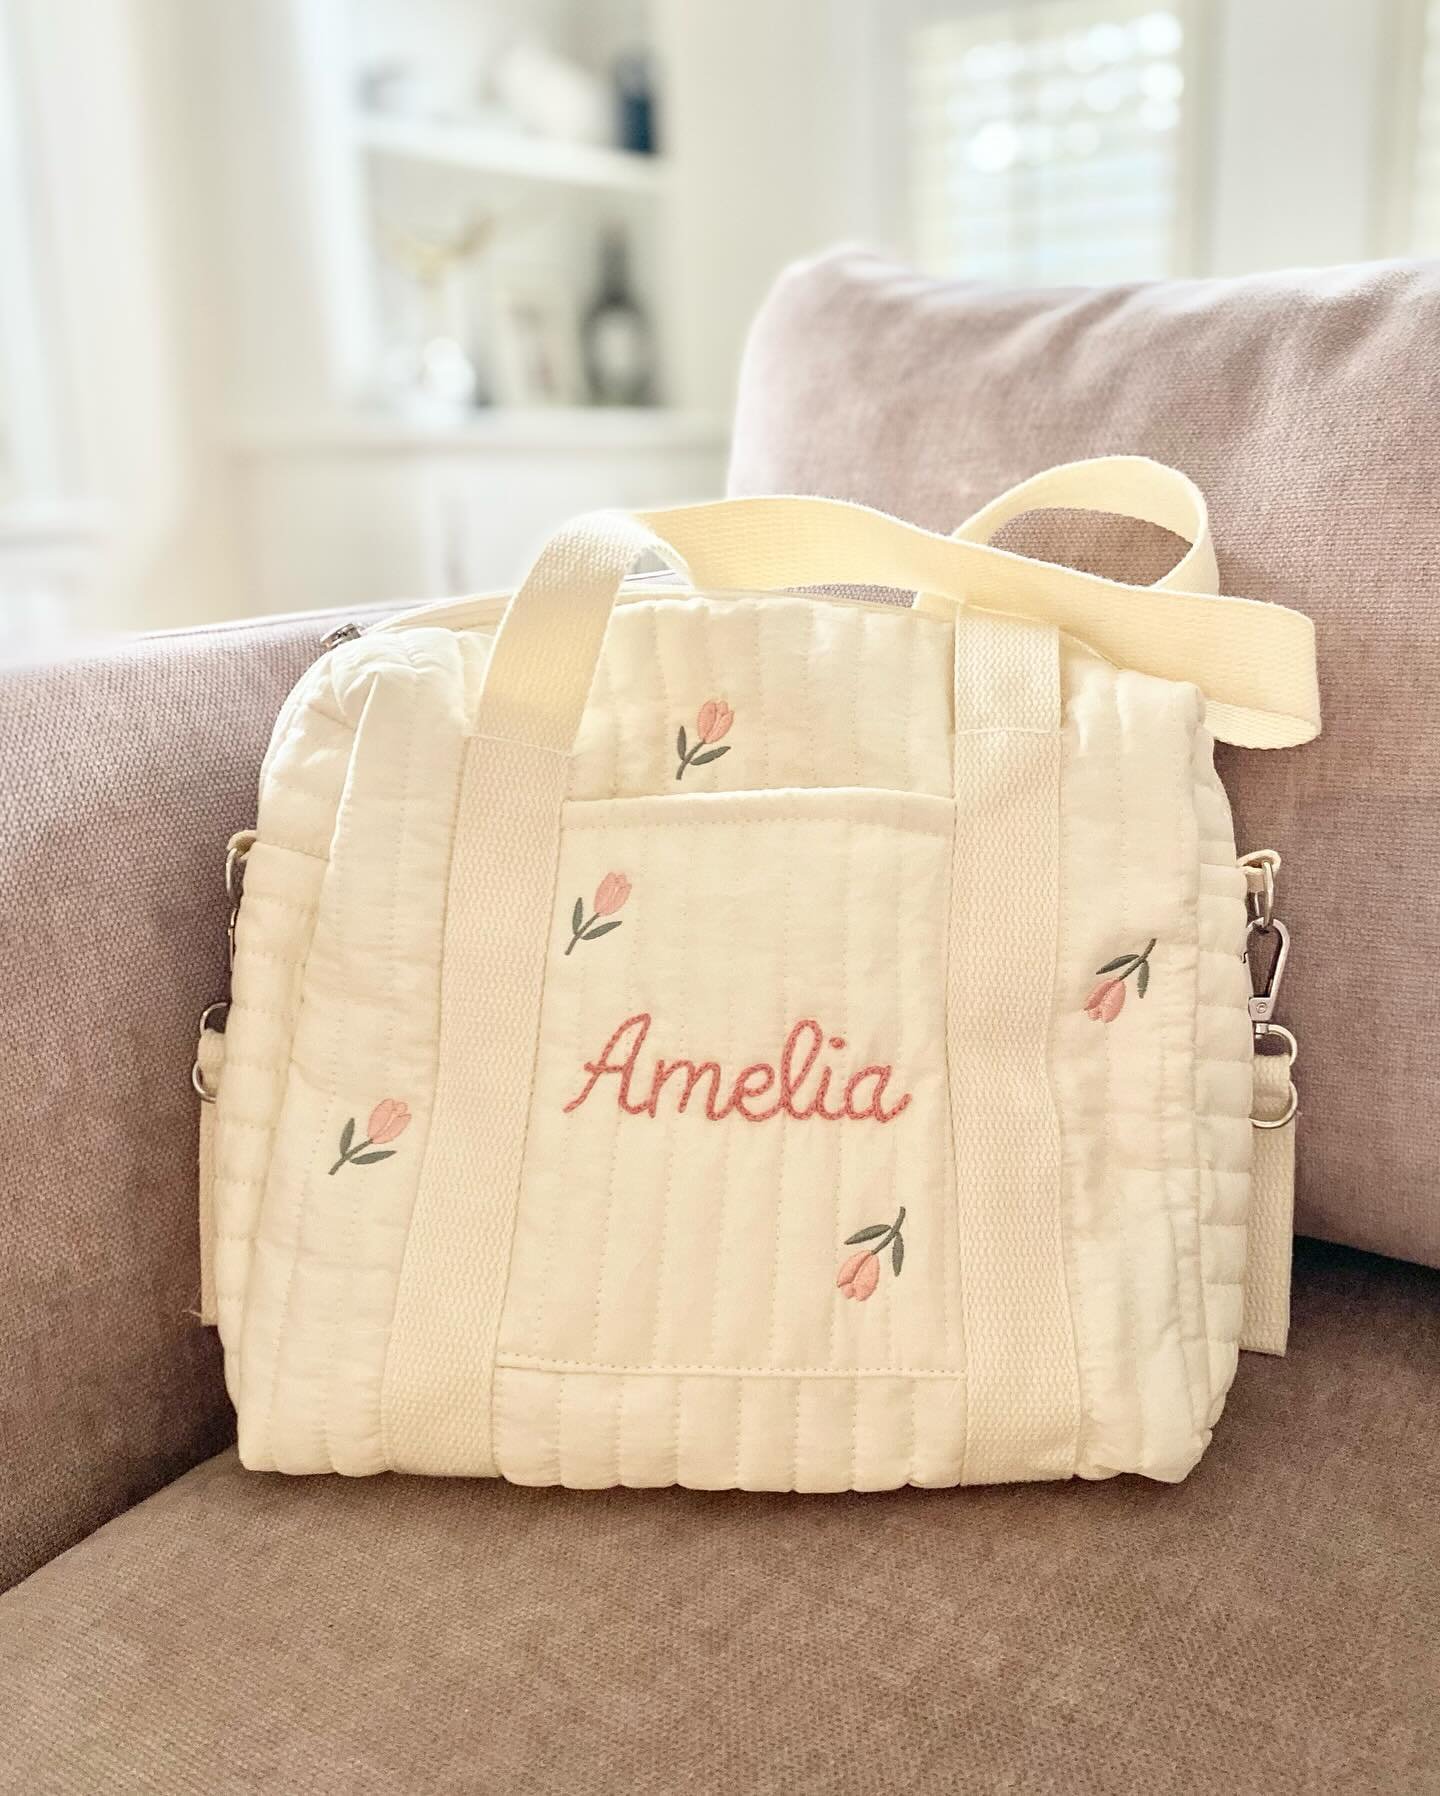 Tulip Stroller Bag for this California girl! 🌷☀️ Can&rsquo;t you picture her strolling down the streets of LA with all her fav baby essentials in tow?! We love this bag!

Welcome to the world sweet Amelia! 💕